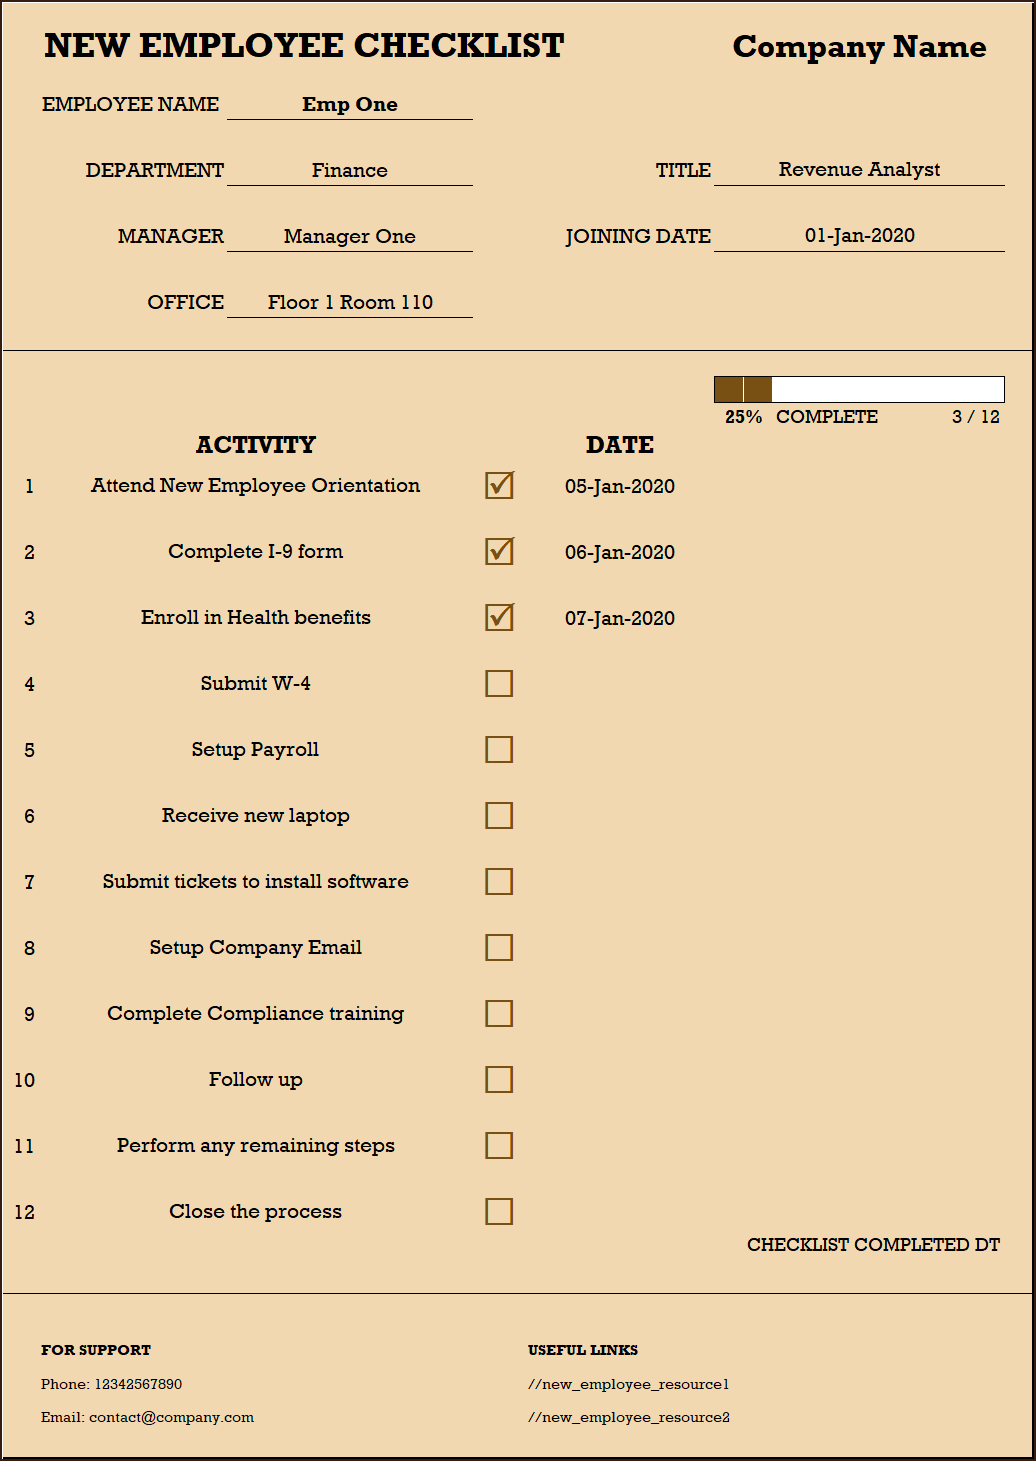 Checklist for New Hire - New Employee Checklist Excel Template - Free Intended For Personnel File Checklist Template Throughout Personnel File Checklist Template